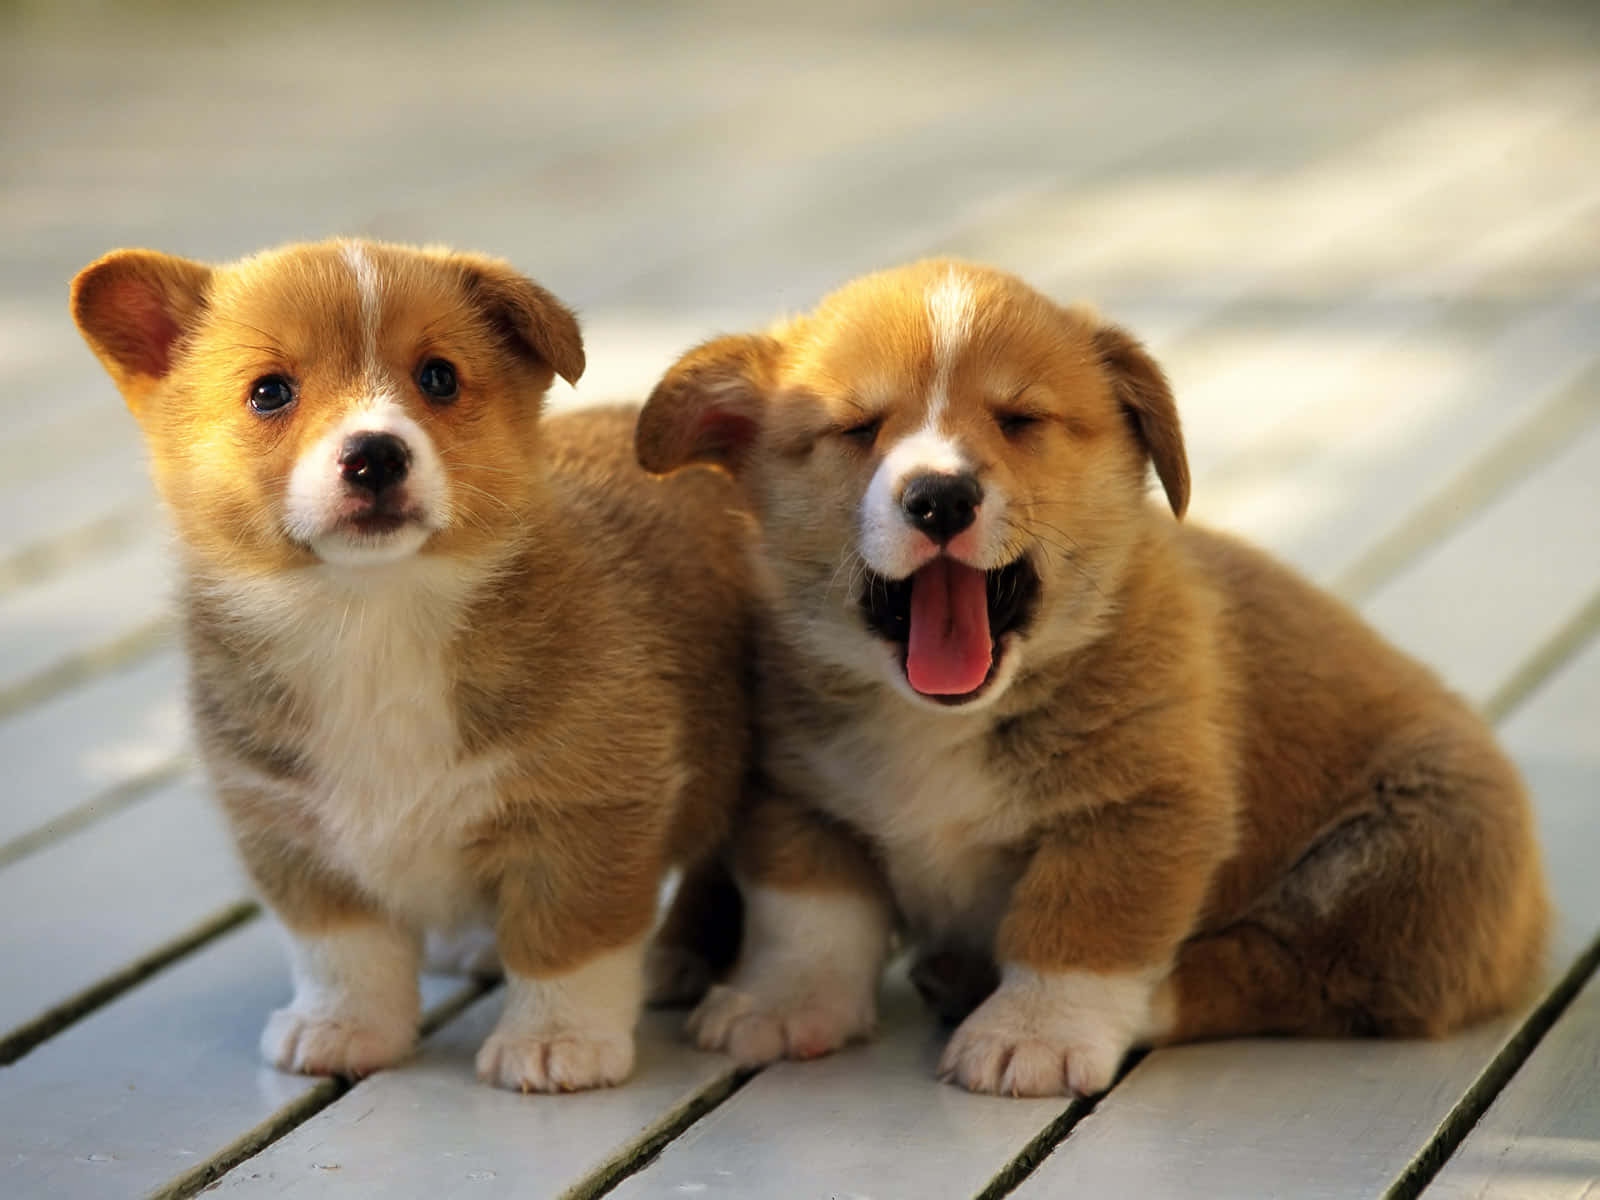 Two Small Brown And White Puppies Sitting On A Wooden Deck Wallpaper